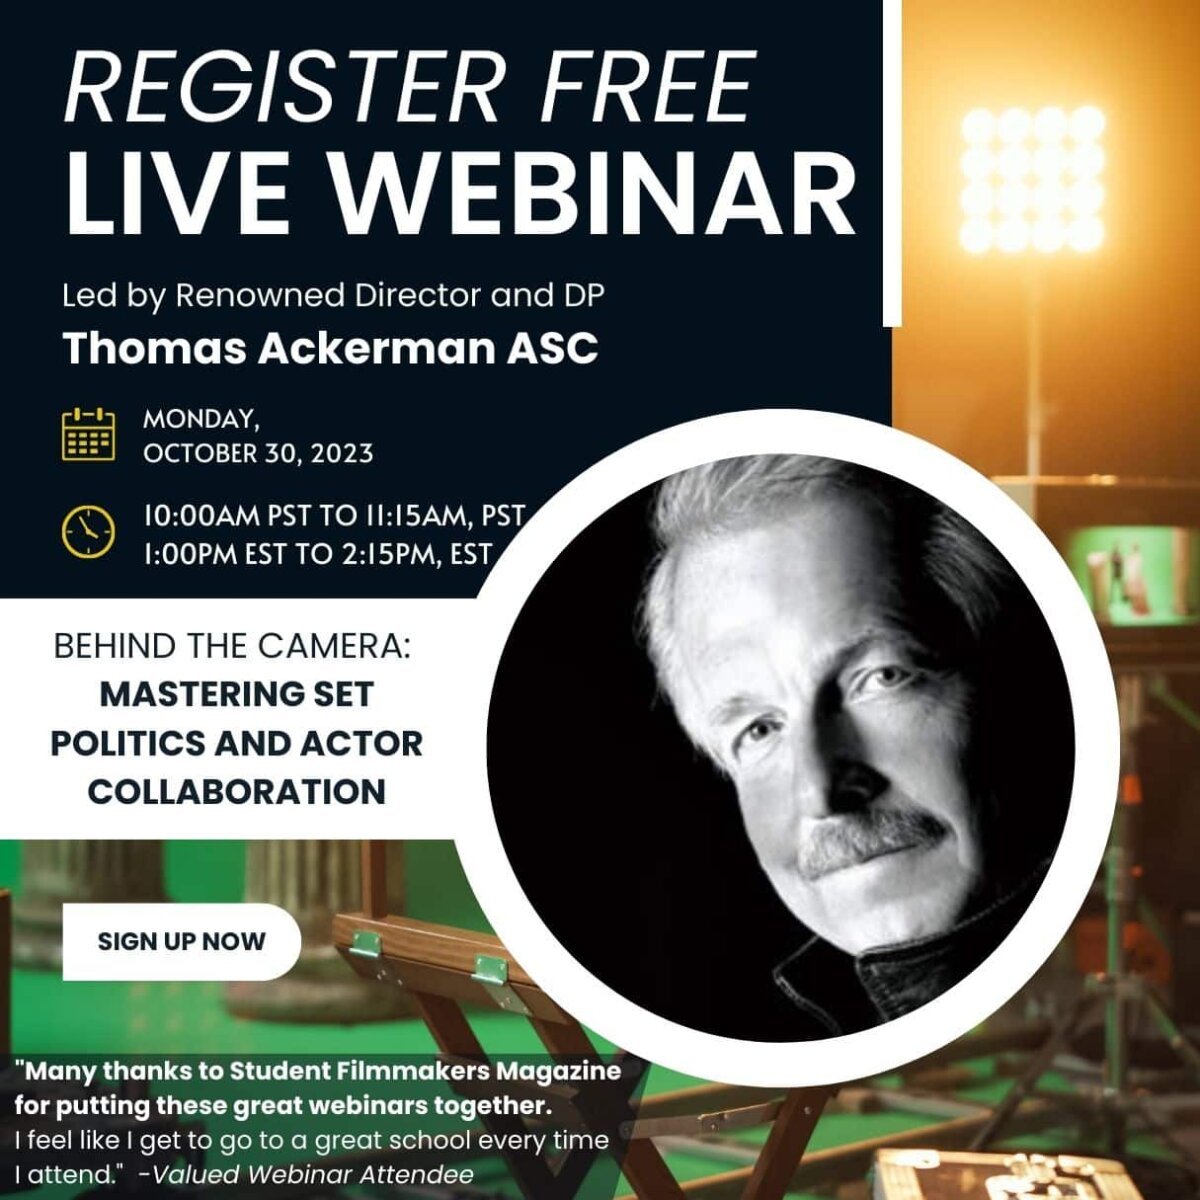 REGISTER FREE! LIVE WEBINAR | Behind the Camera: Mastering Set Politics and Actor Collaboration with Renowned Director and Director of Photography Thomas Ackerman ASC